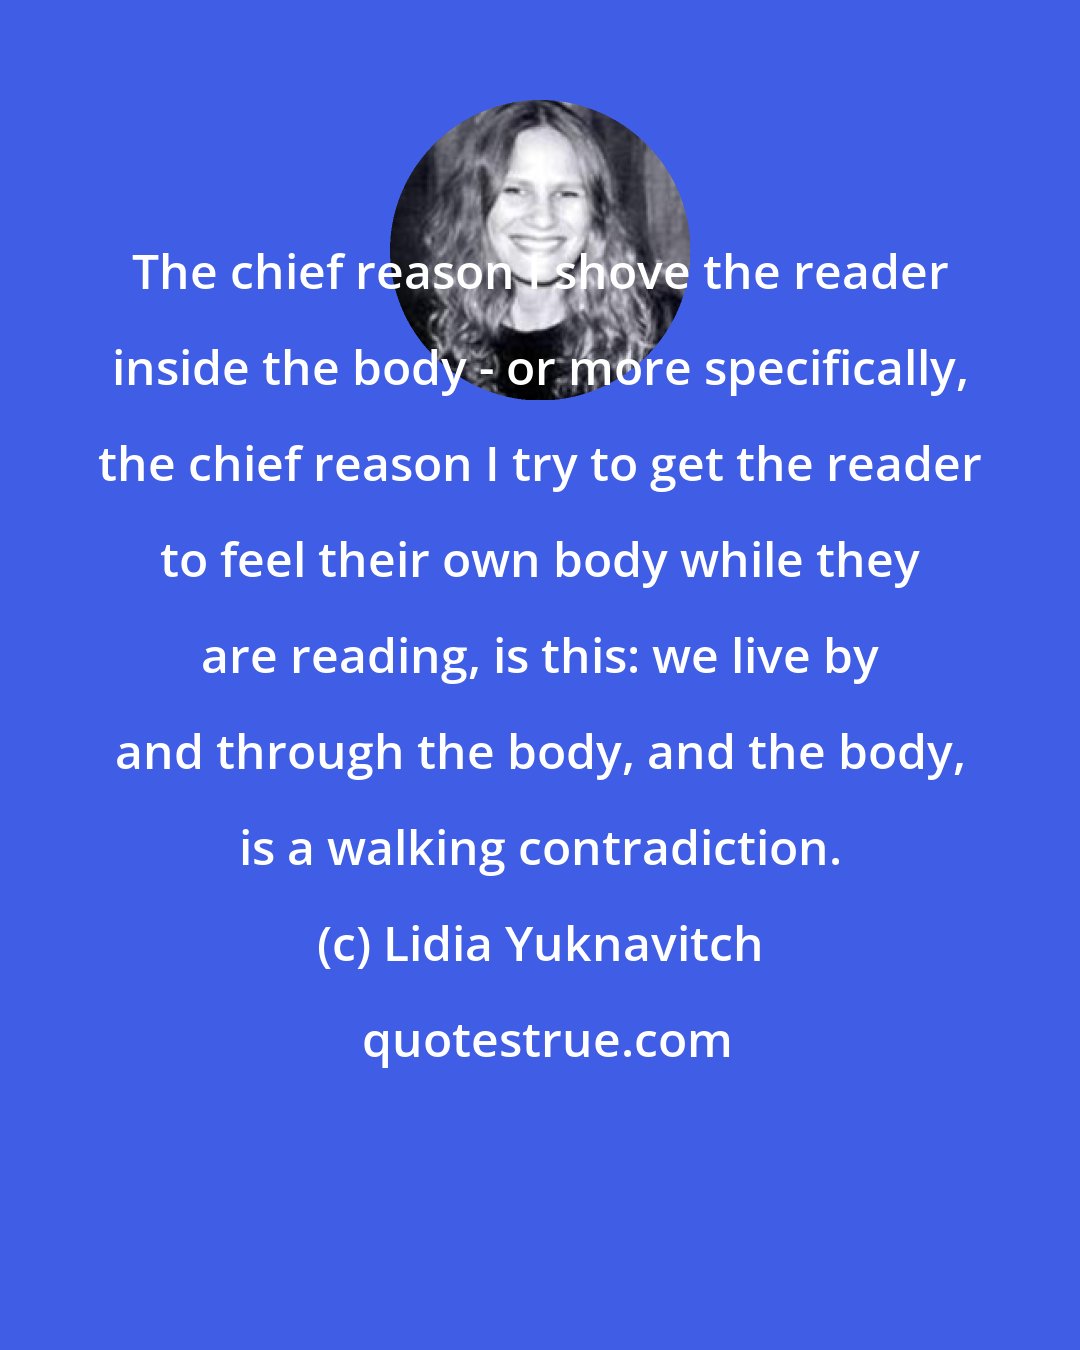 Lidia Yuknavitch: The chief reason I shove the reader inside the body - or more specifically, the chief reason I try to get the reader to feel their own body while they are reading, is this: we live by and through the body, and the body, is a walking contradiction.